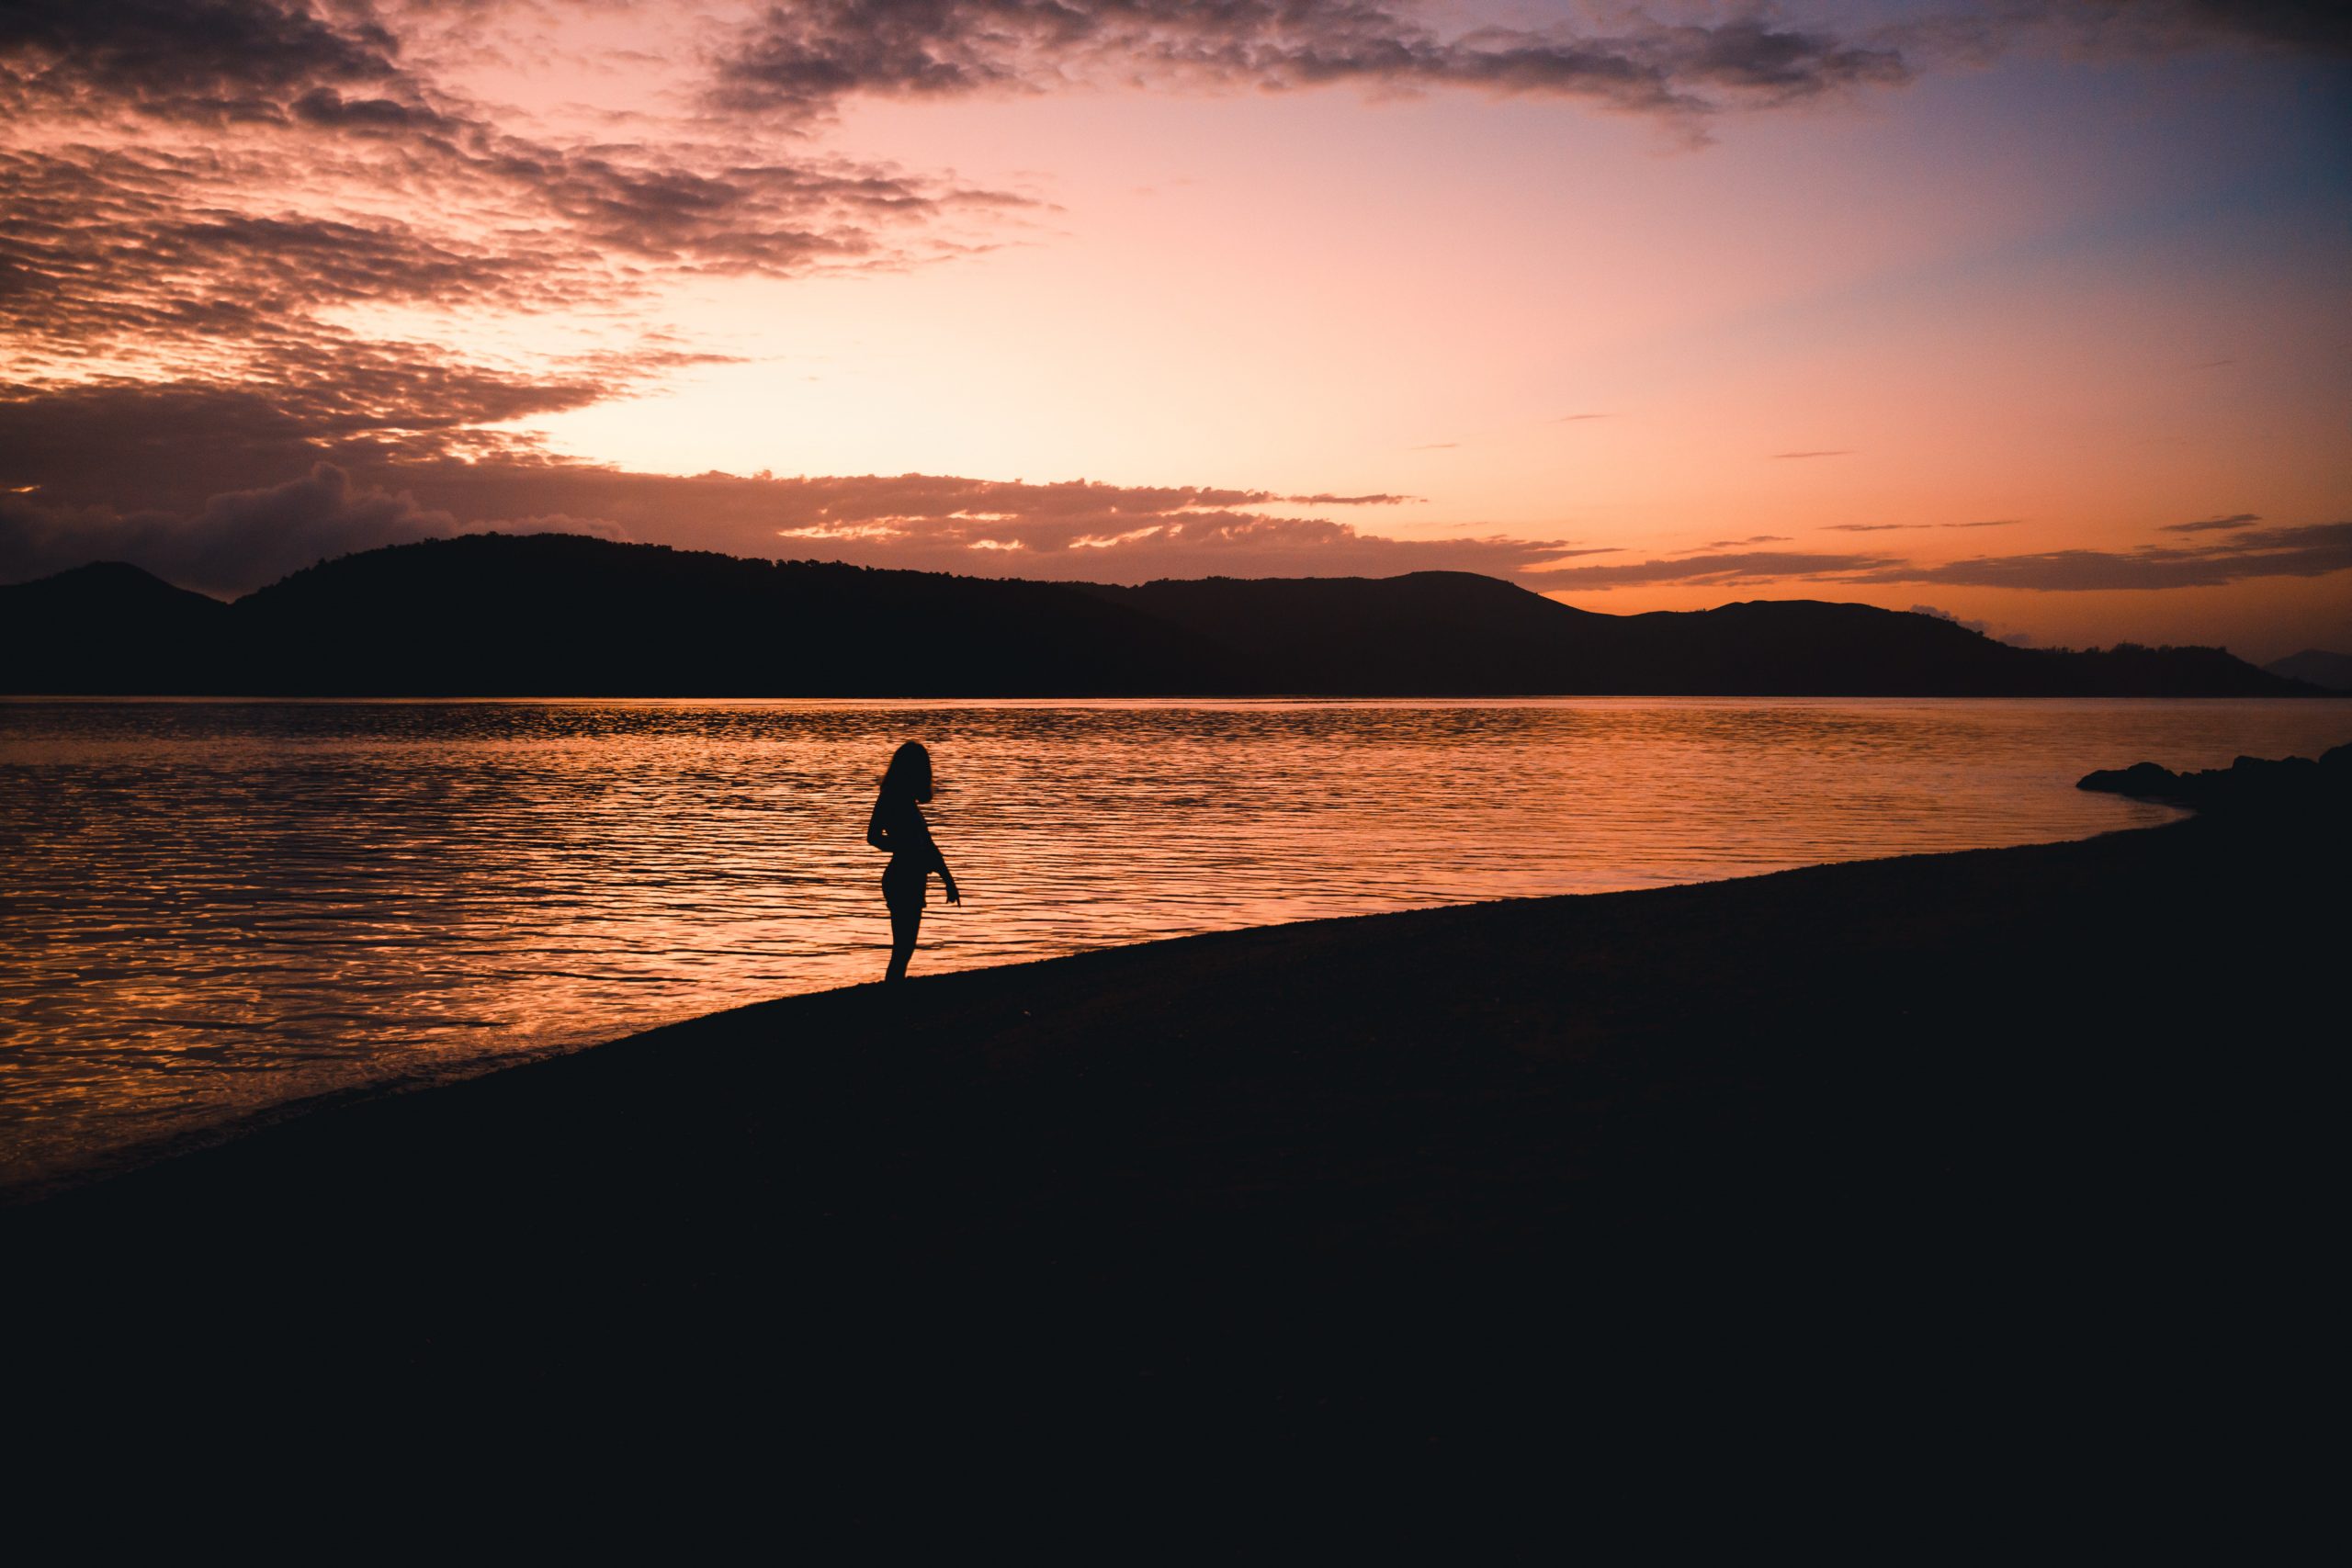 girl in front of sunrise on daydream island in the whitsunday islands (Hamilton island) Queensland Australia